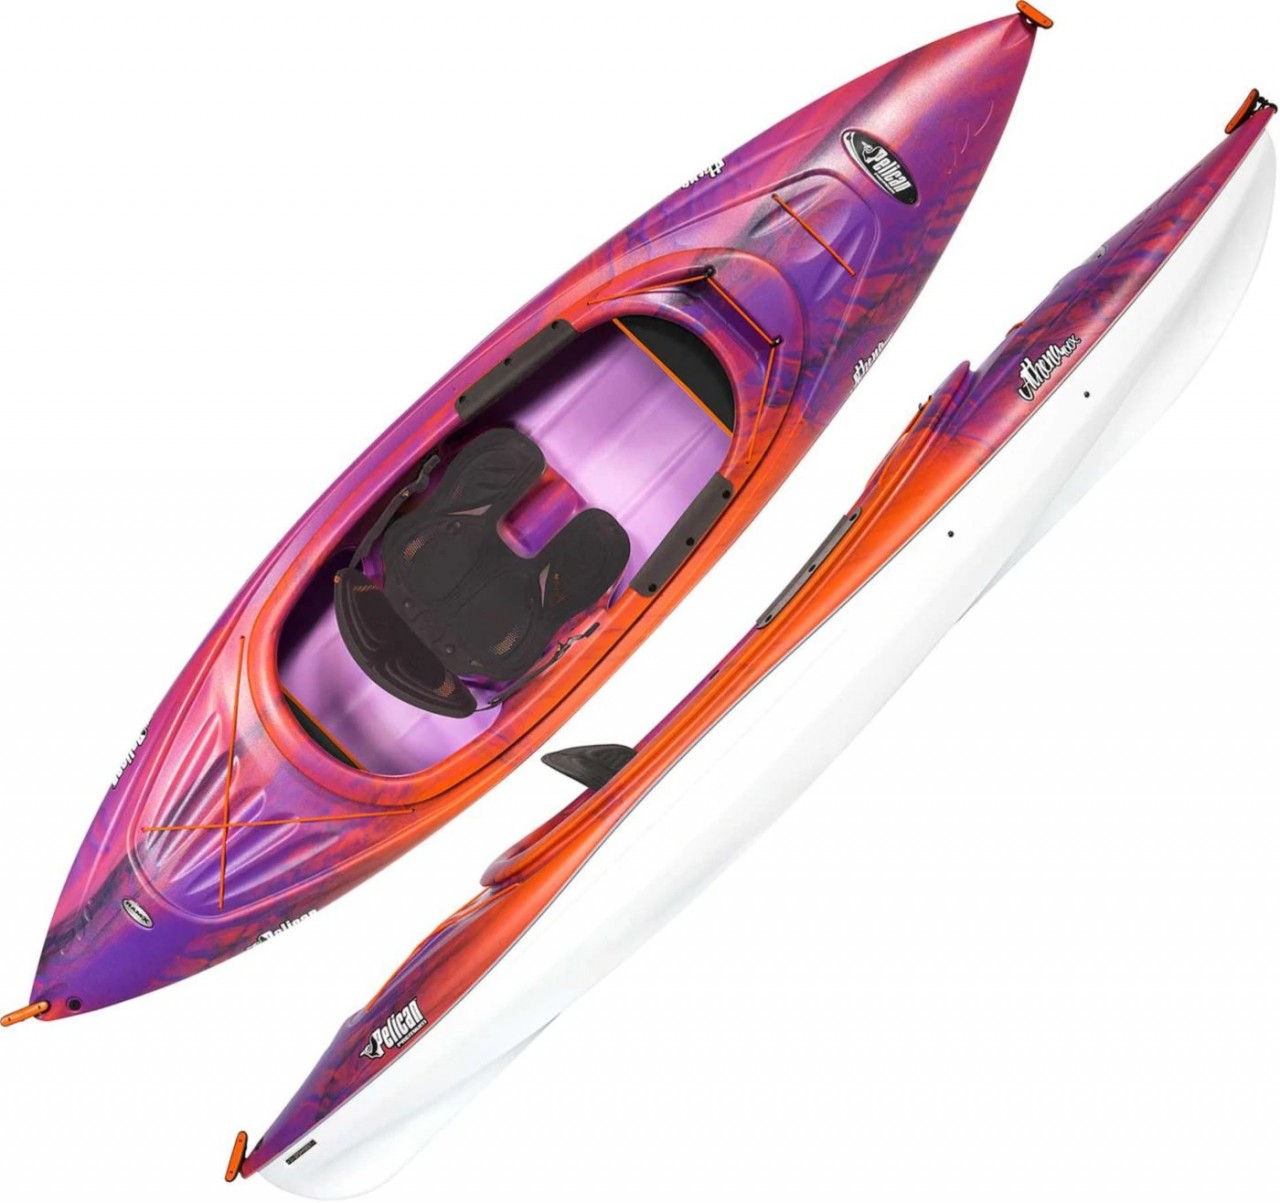 https://asiankayak.com/product_images/m/346/Pelican_Women%27s_Athena_100X_Kayak_with_Paddle__36470_zoom.jpg